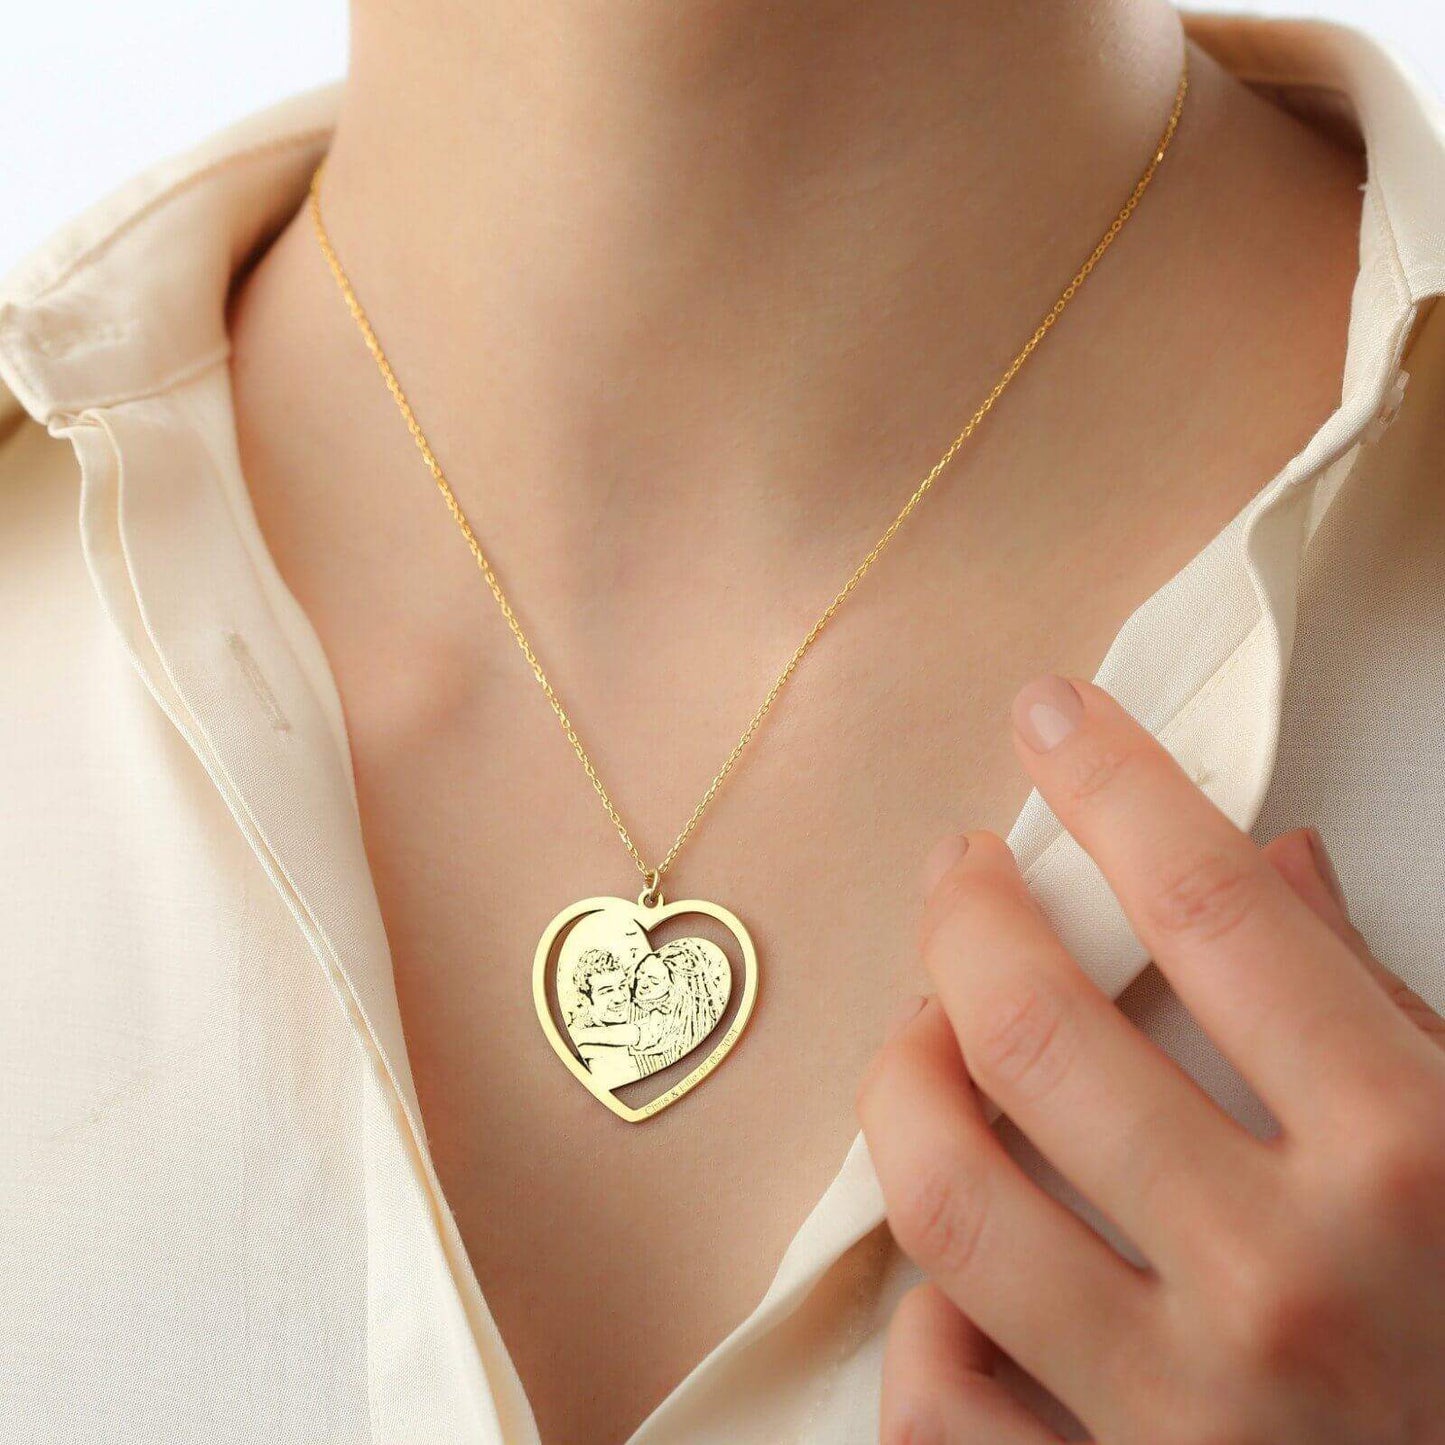 Personalised Heart Photo Engraving Necklace👩‍❤️‍👨